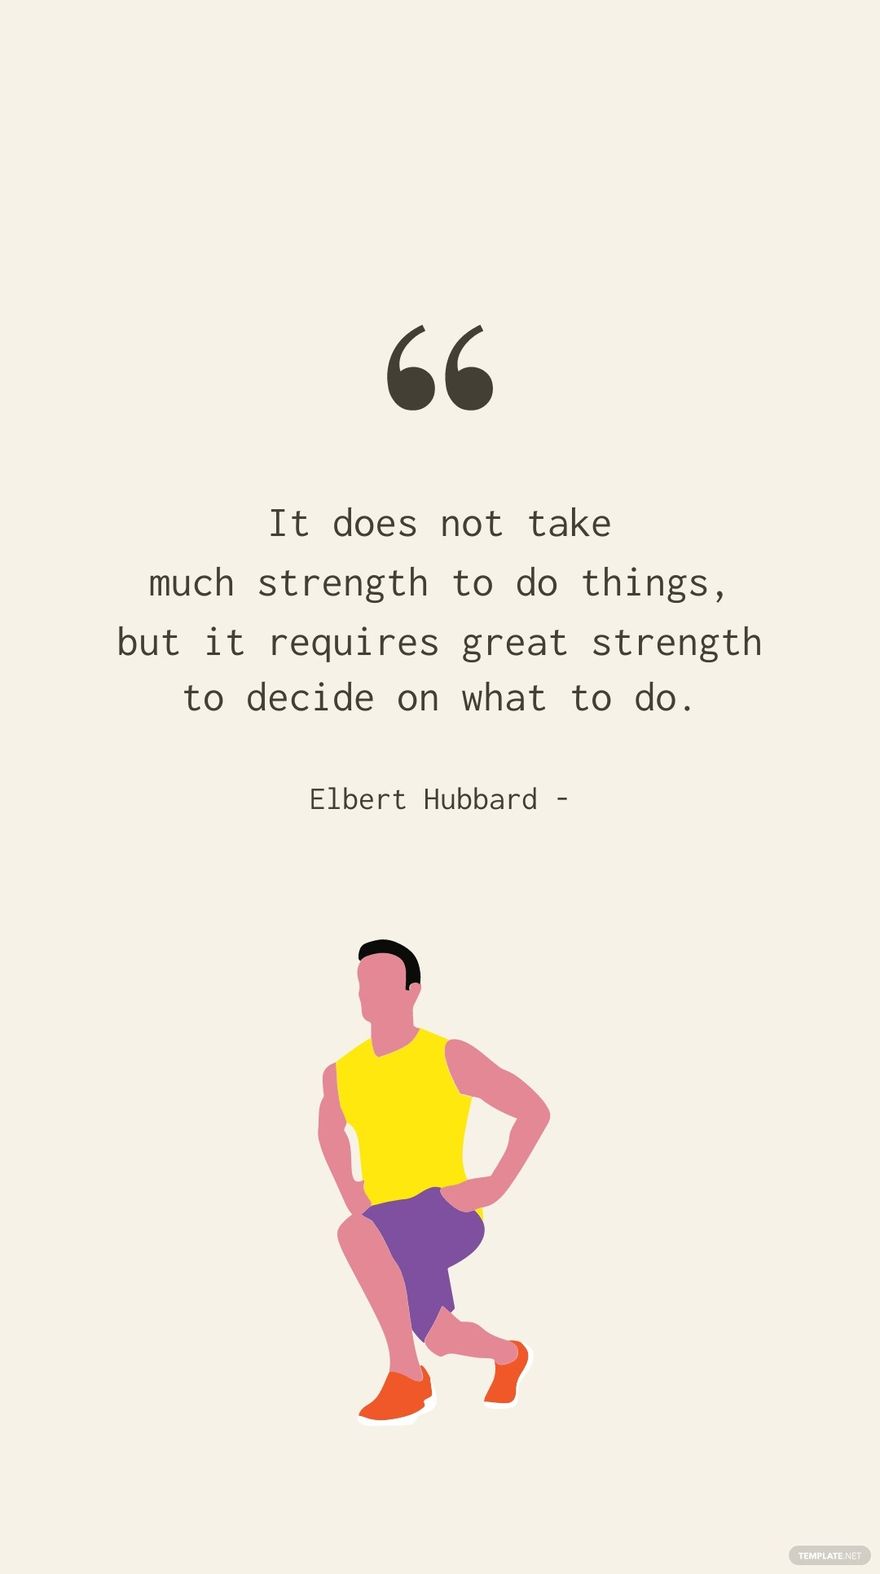 Elbert Hubbard - It does not take much strength to do things, but it requires great strength to decide on what to do.